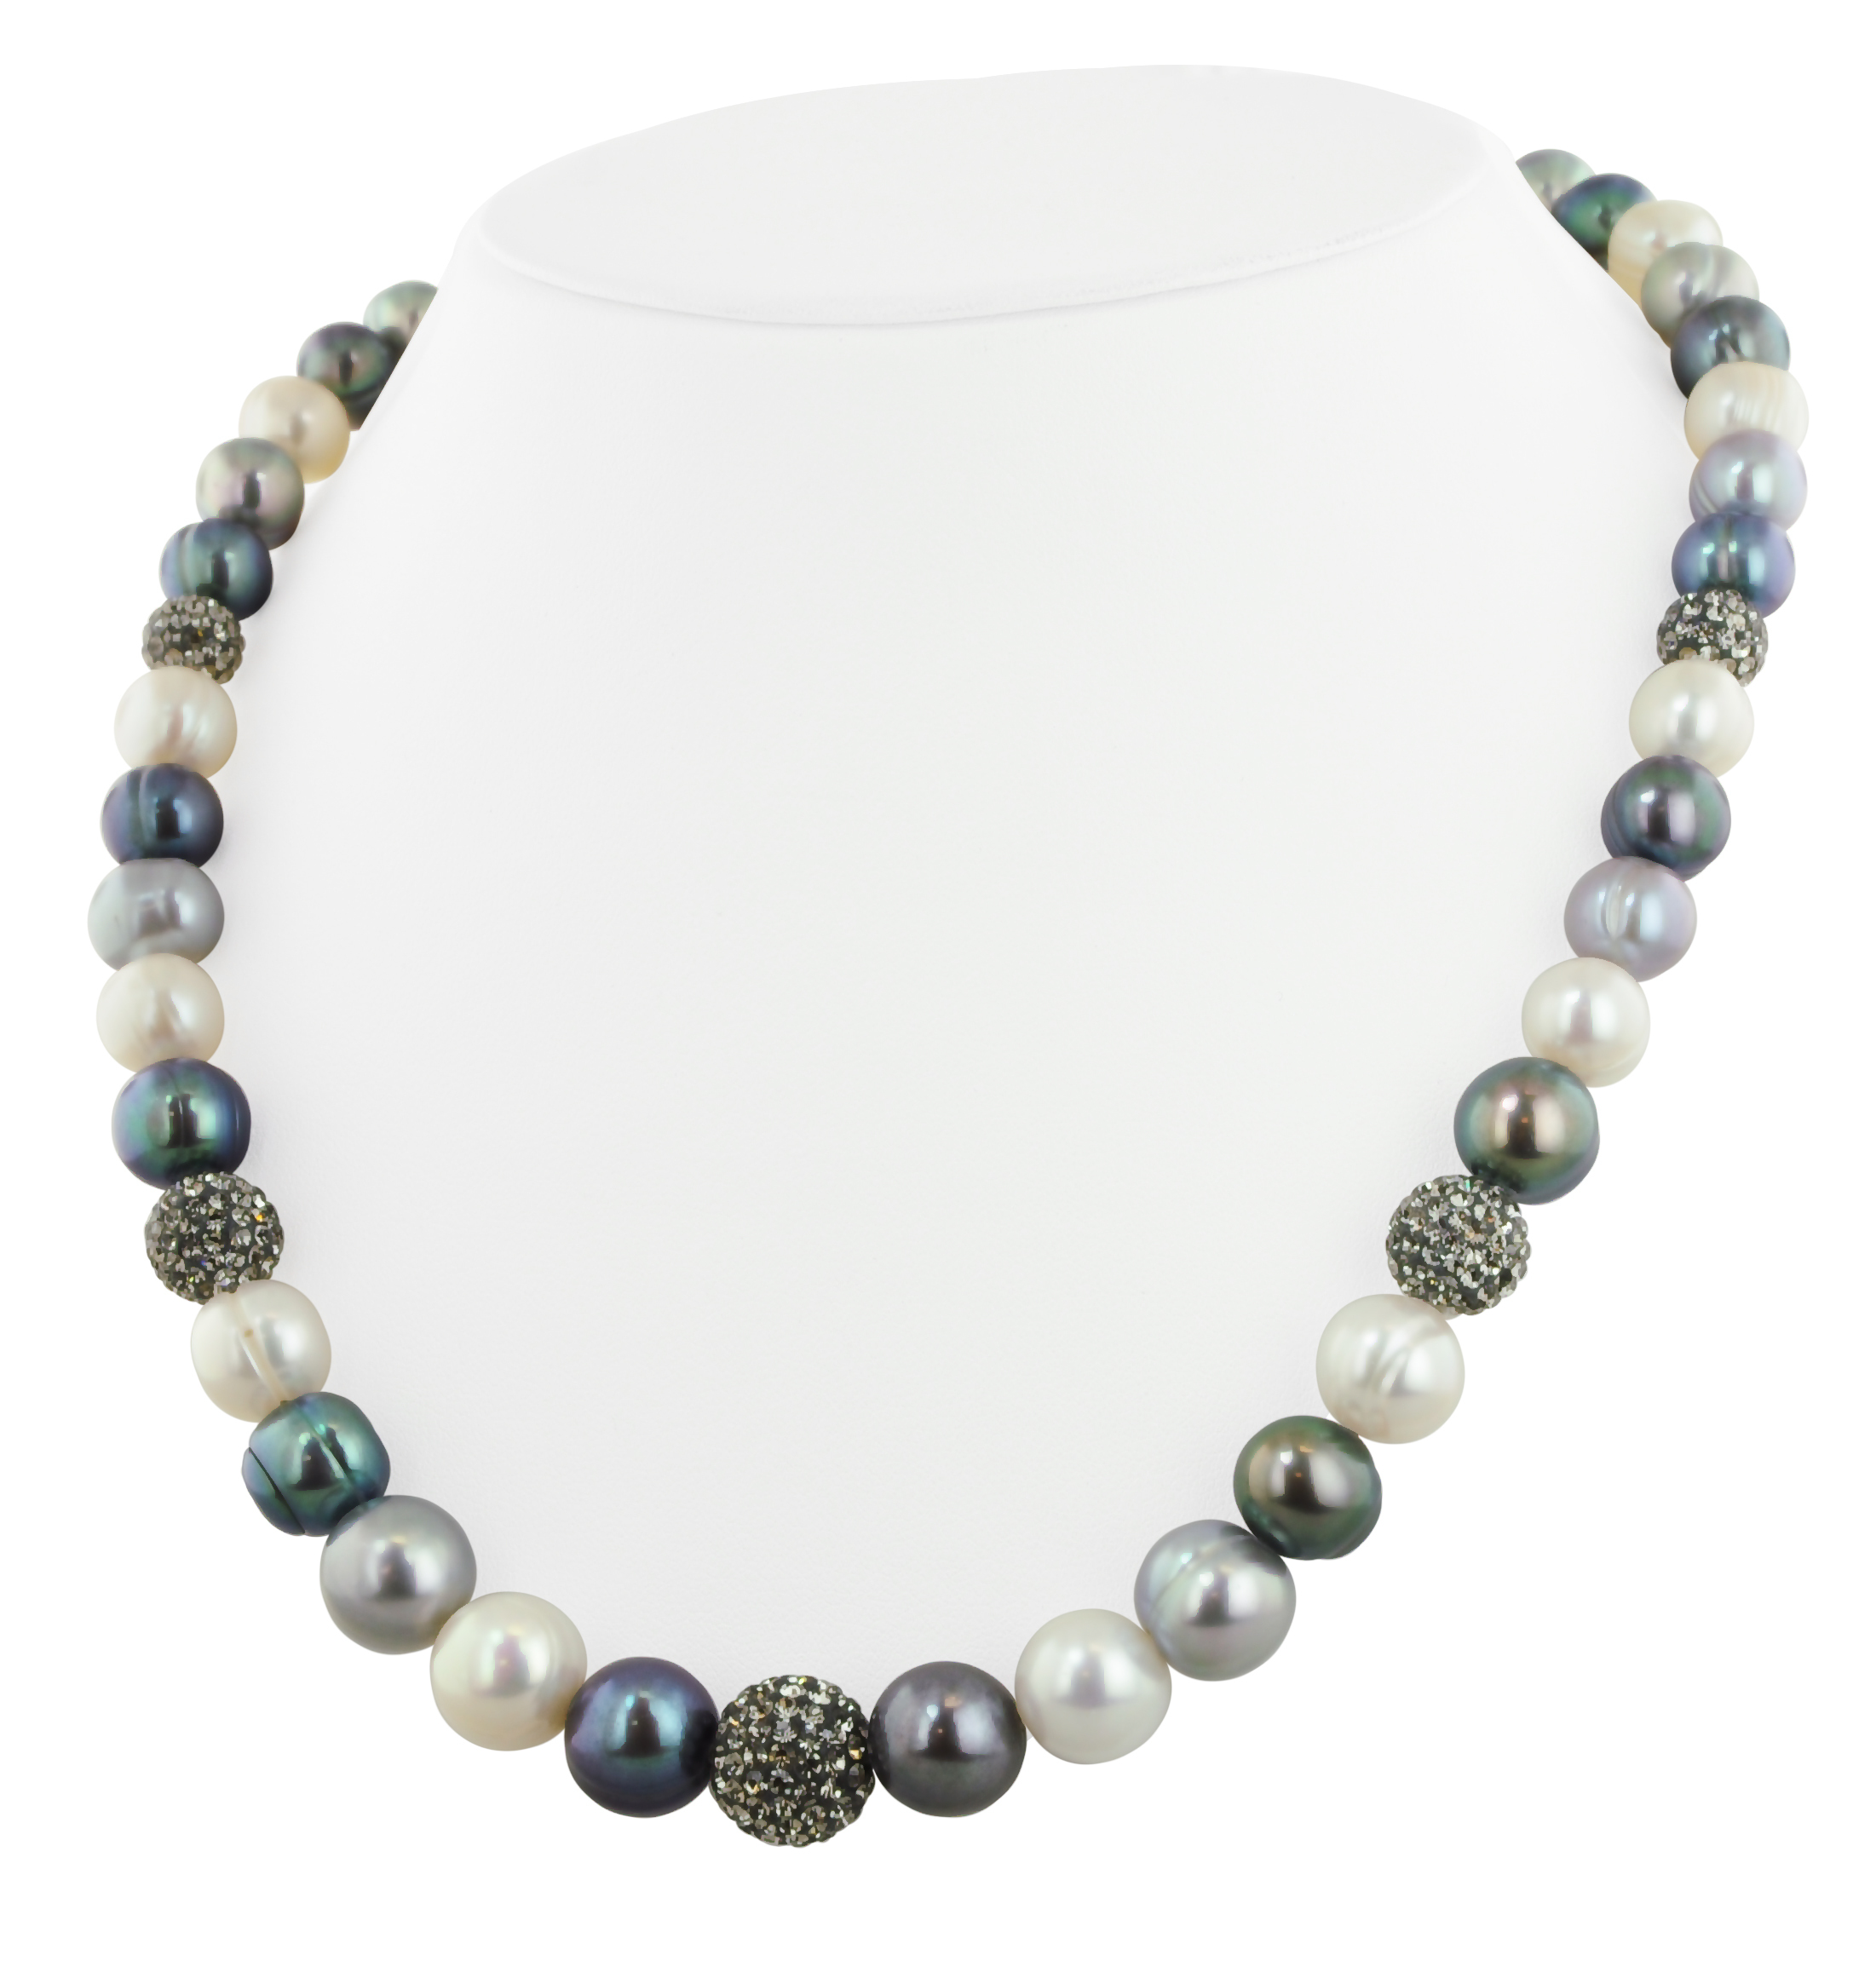 Sterling Silver 8-12mm Black, White and Grey Ringed Freshwater Cultured Pearl with Pave Crystal Beads 18 Necklace